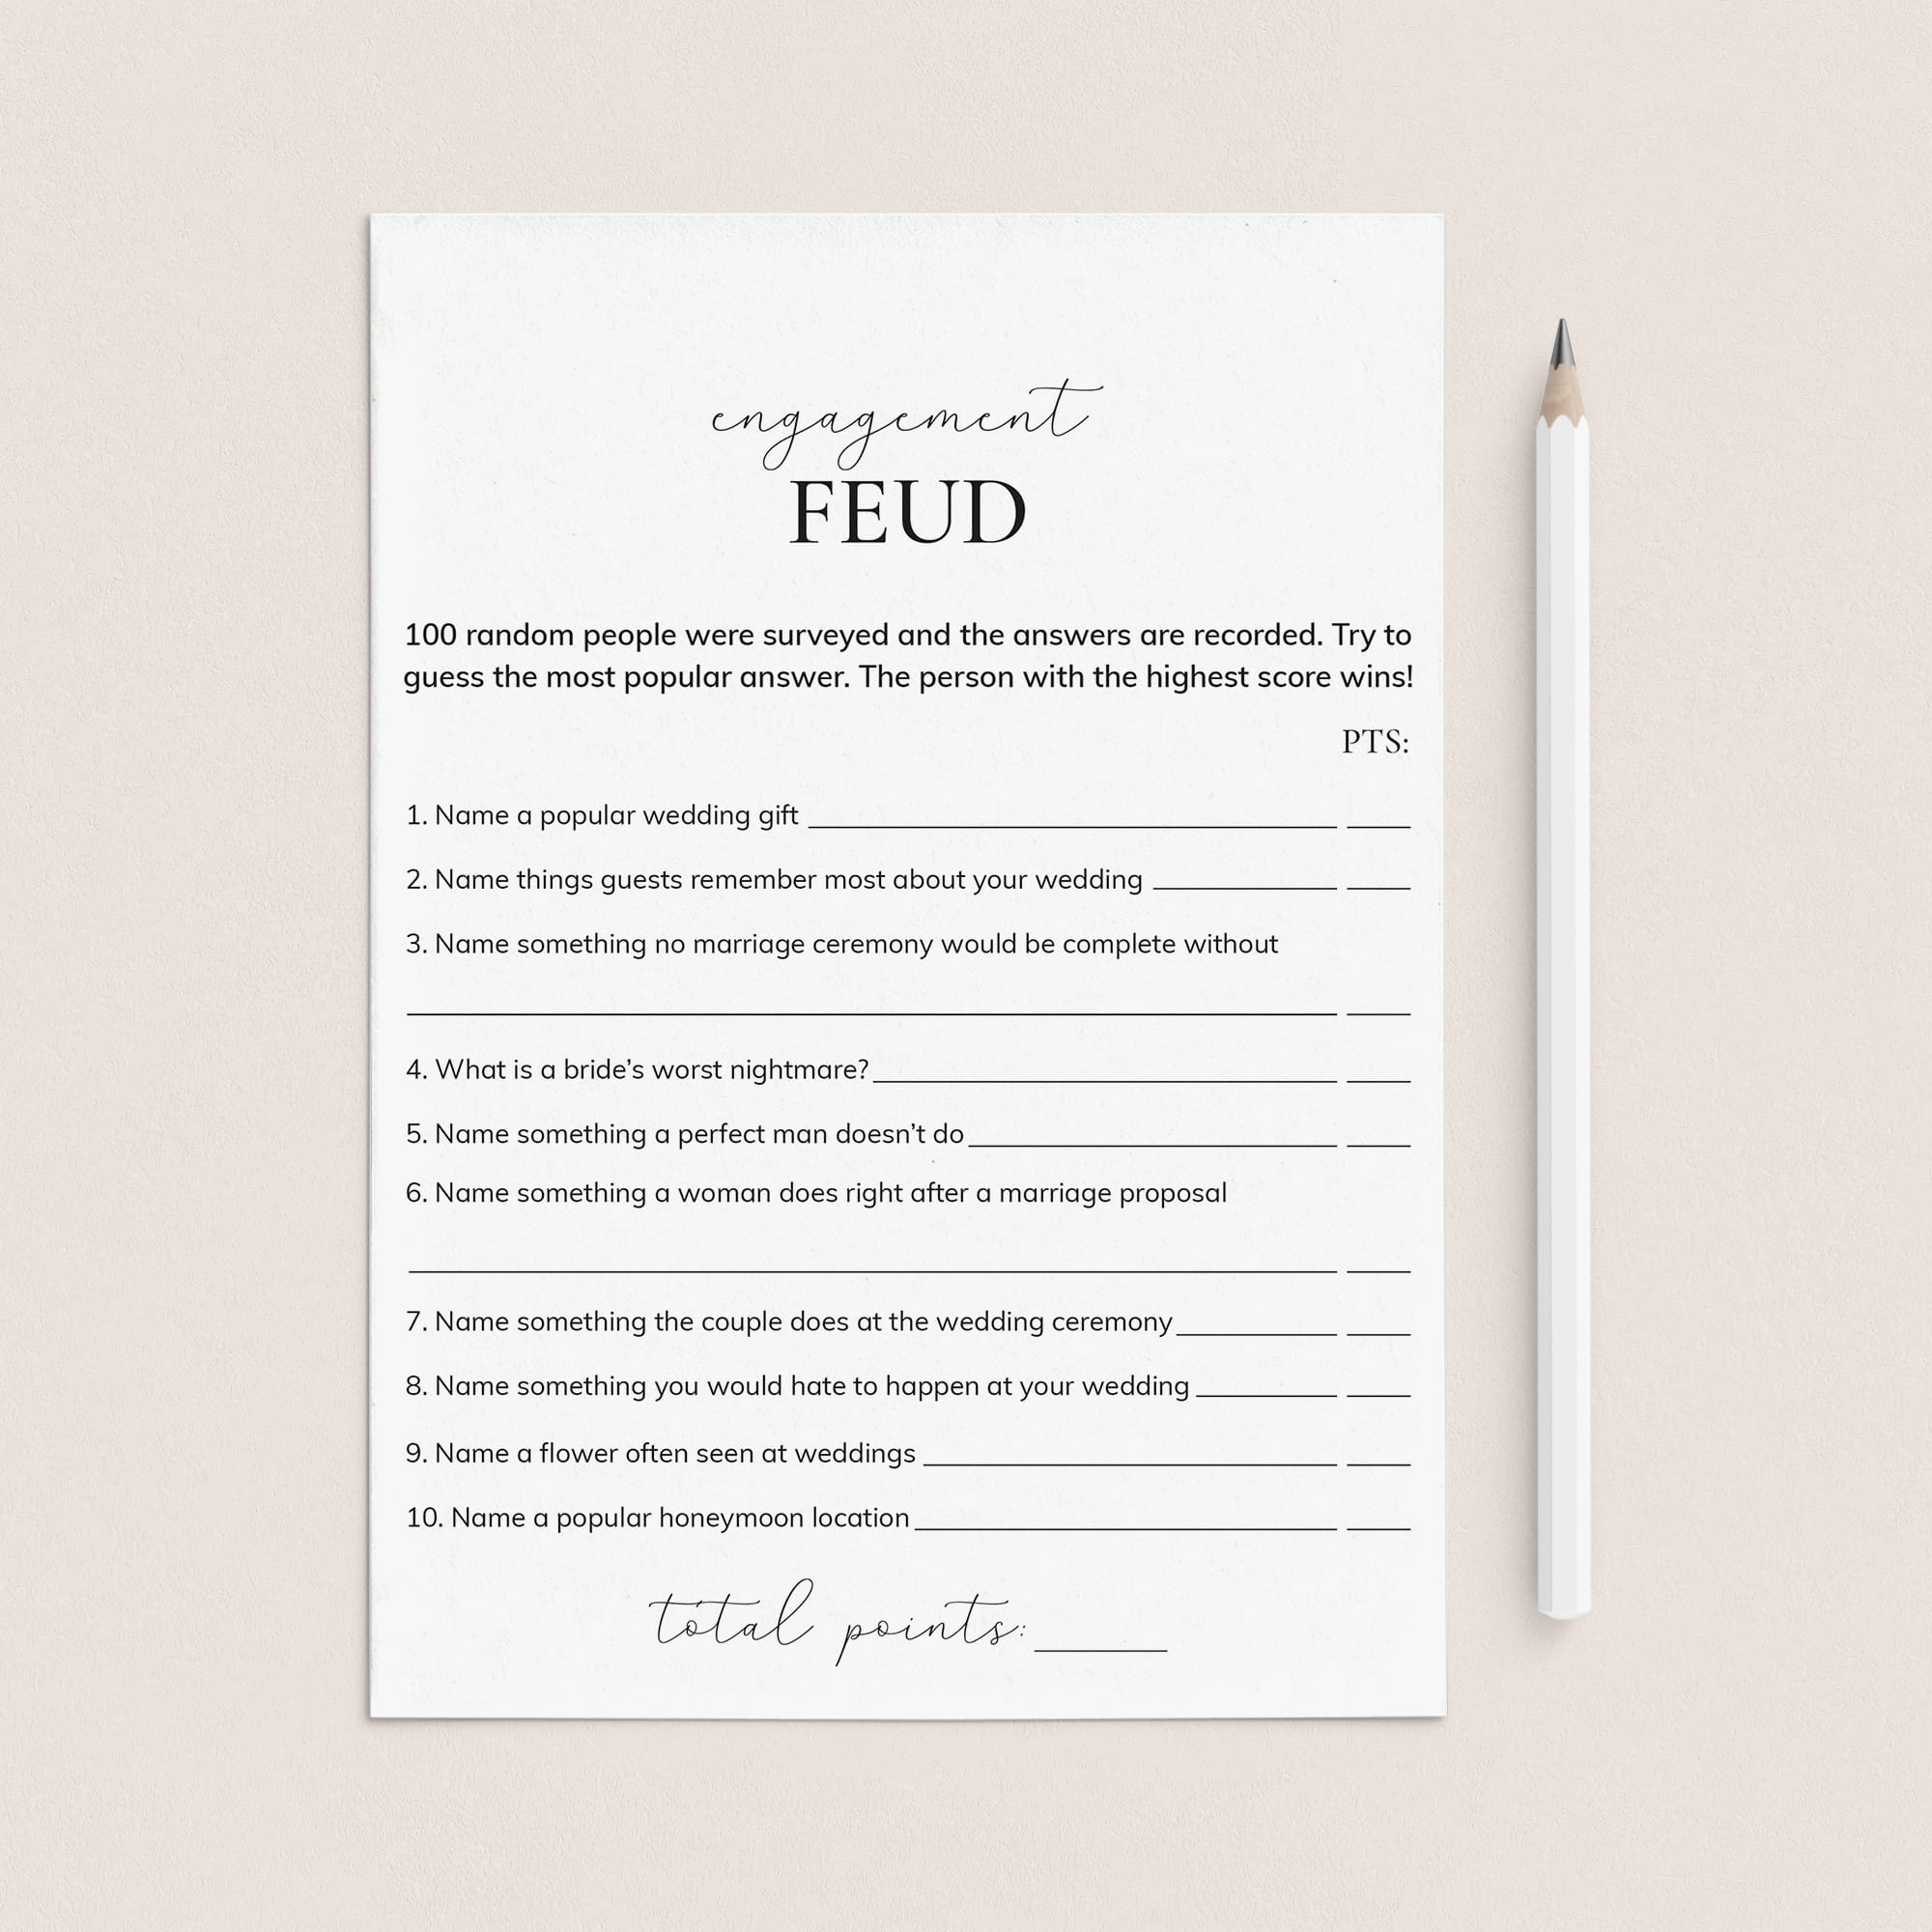 Engagement Feud Questions and Answers Printable by LittleSizzle